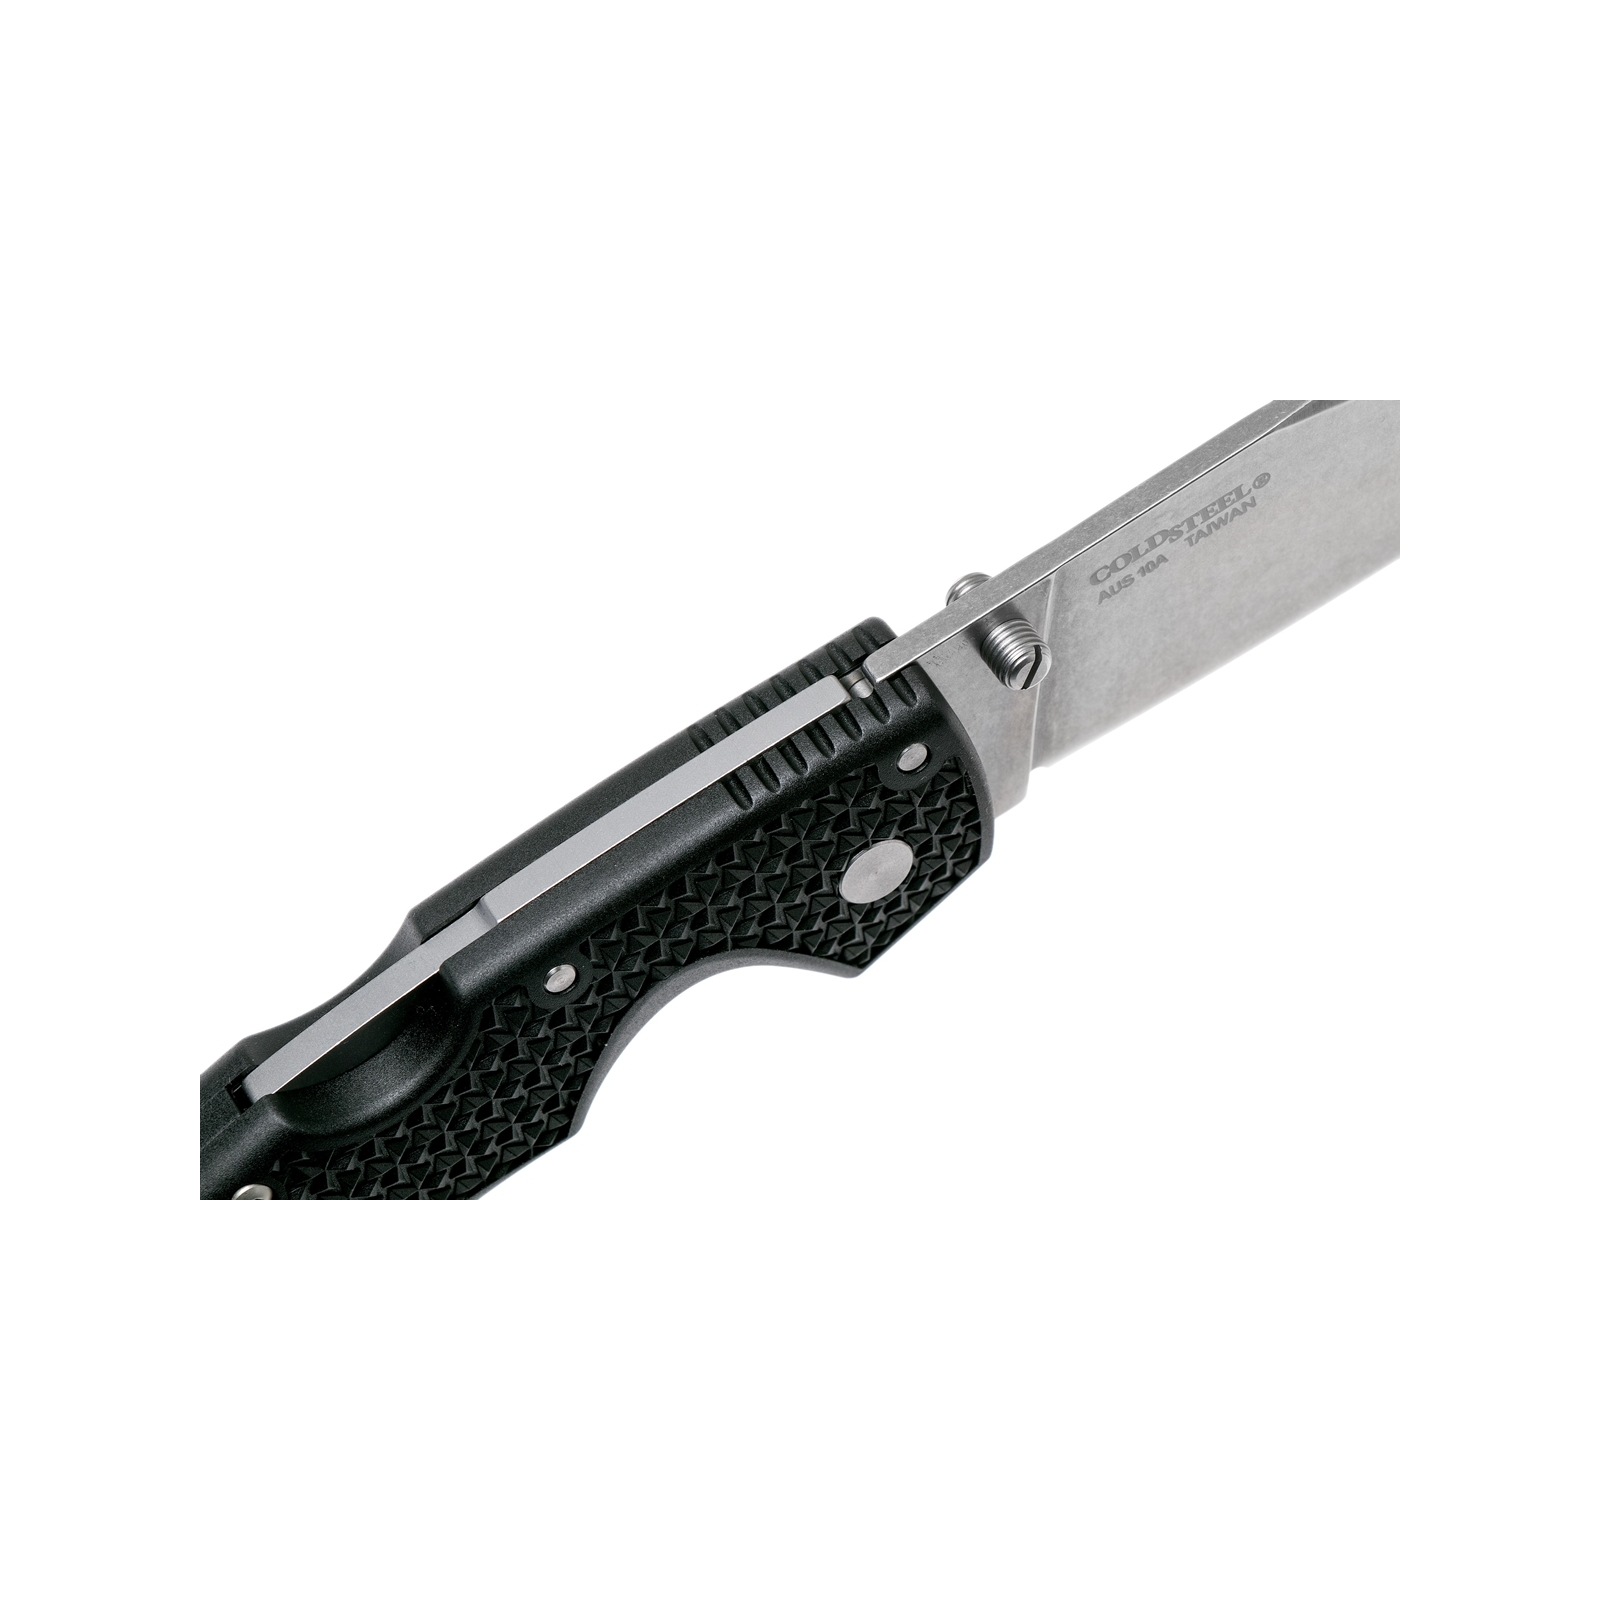 Нож Cold Steel Voyager Large CP, 10A (29AC) изображение 4